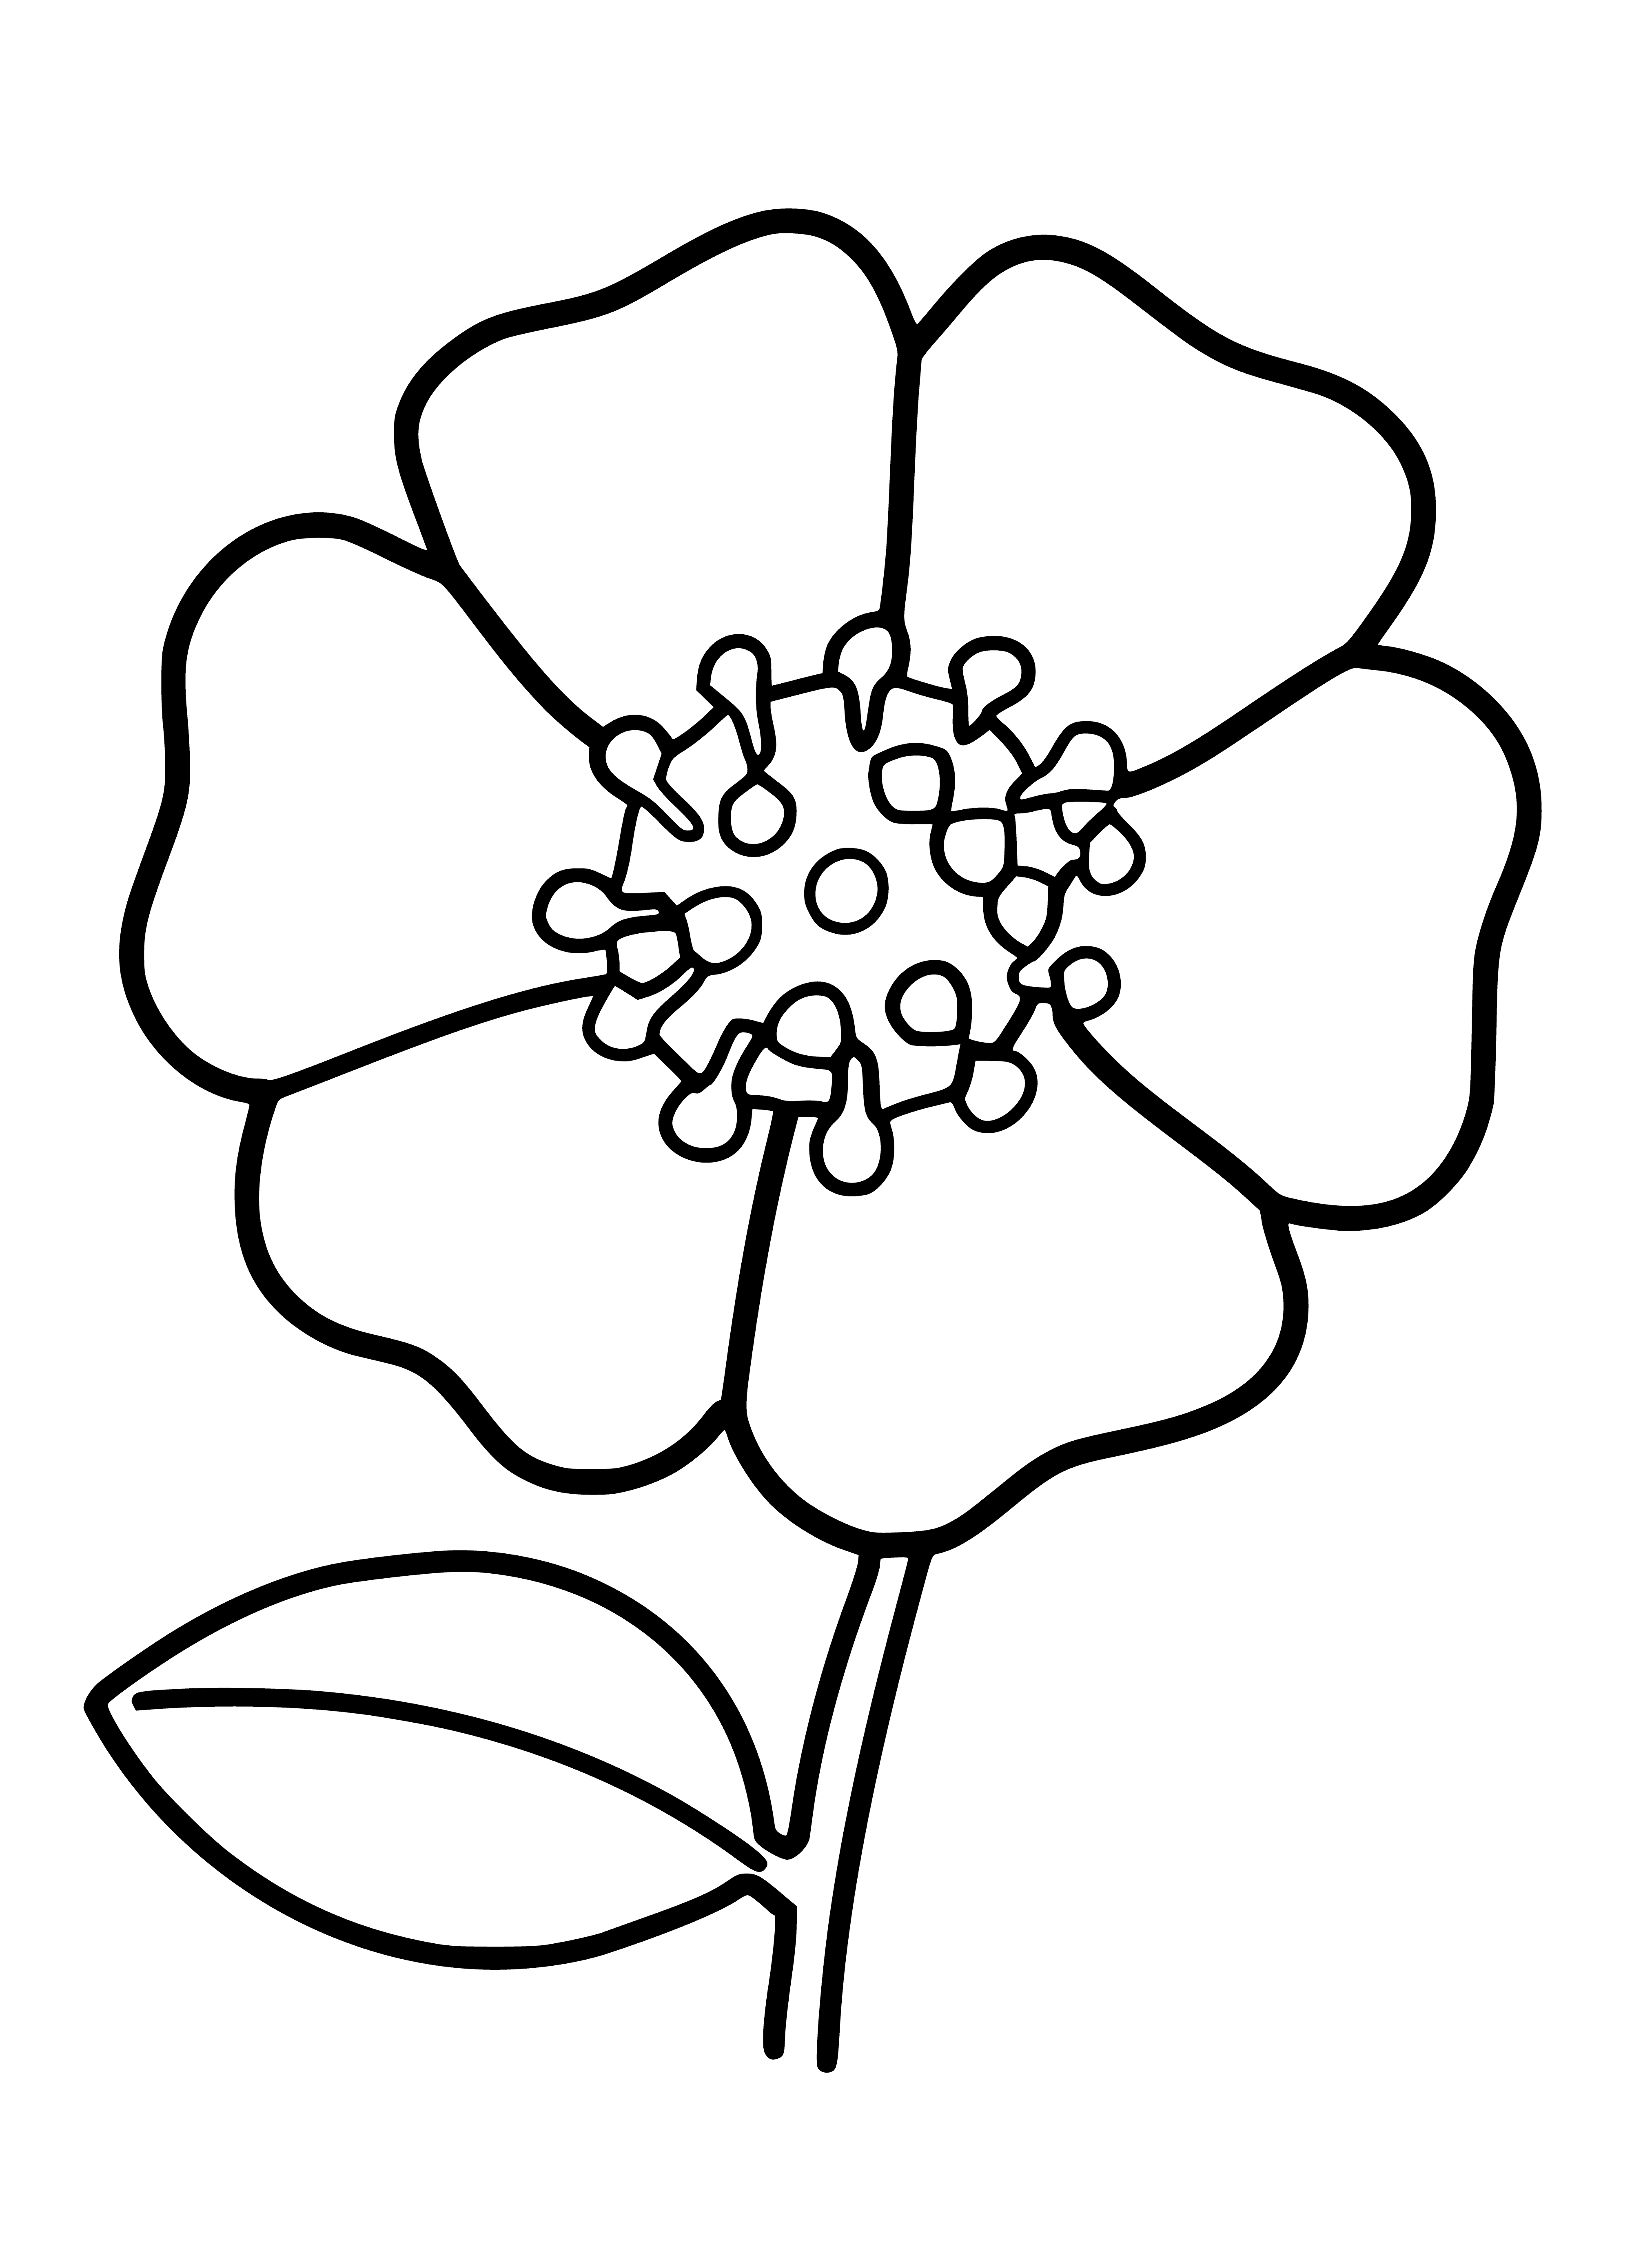 coloring page: Large yellow flower w/black outlines, dots, & green stem. Words "Color me!" at bottom. #color #summer #flower